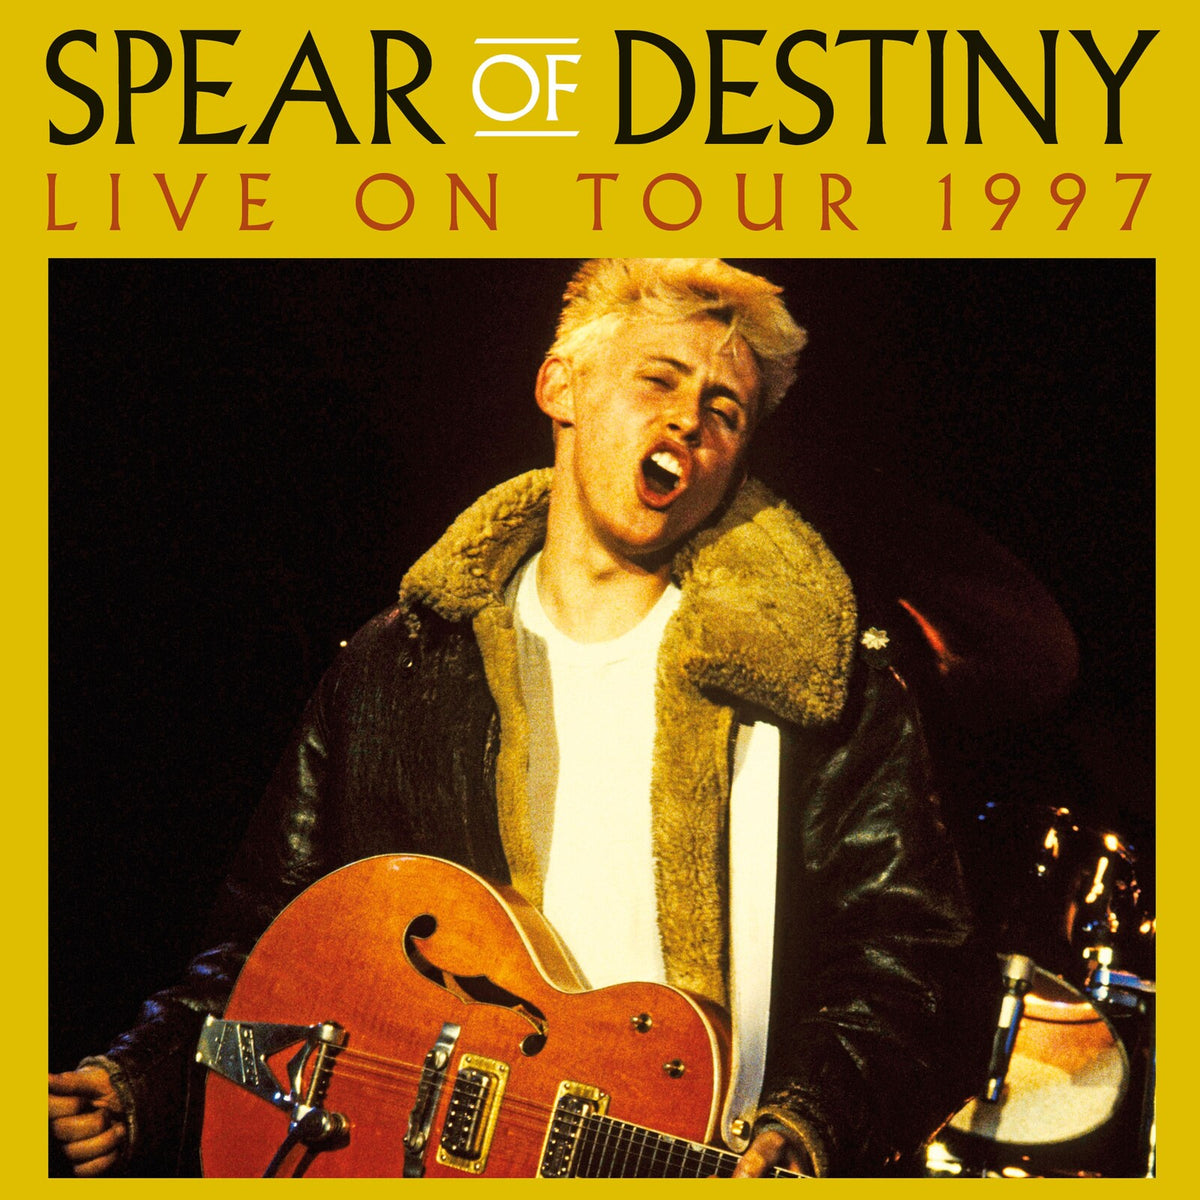 Spear Of Destiny - Live On Tour 1997 - SECLP267